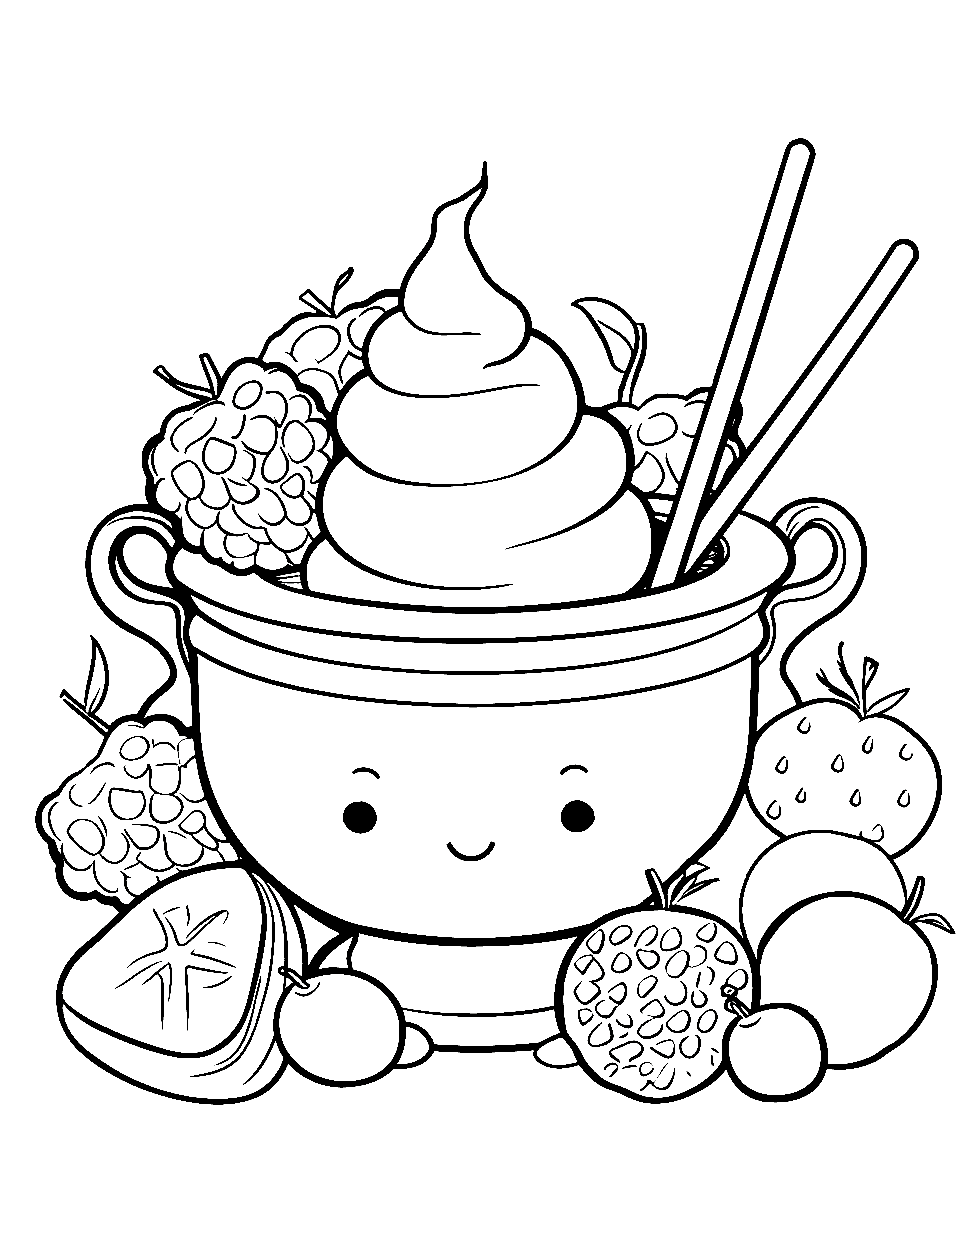 Chocolate Fondue Fun Coloring Page - A melting pot of chocolate with fruits around, ready to be dipped.